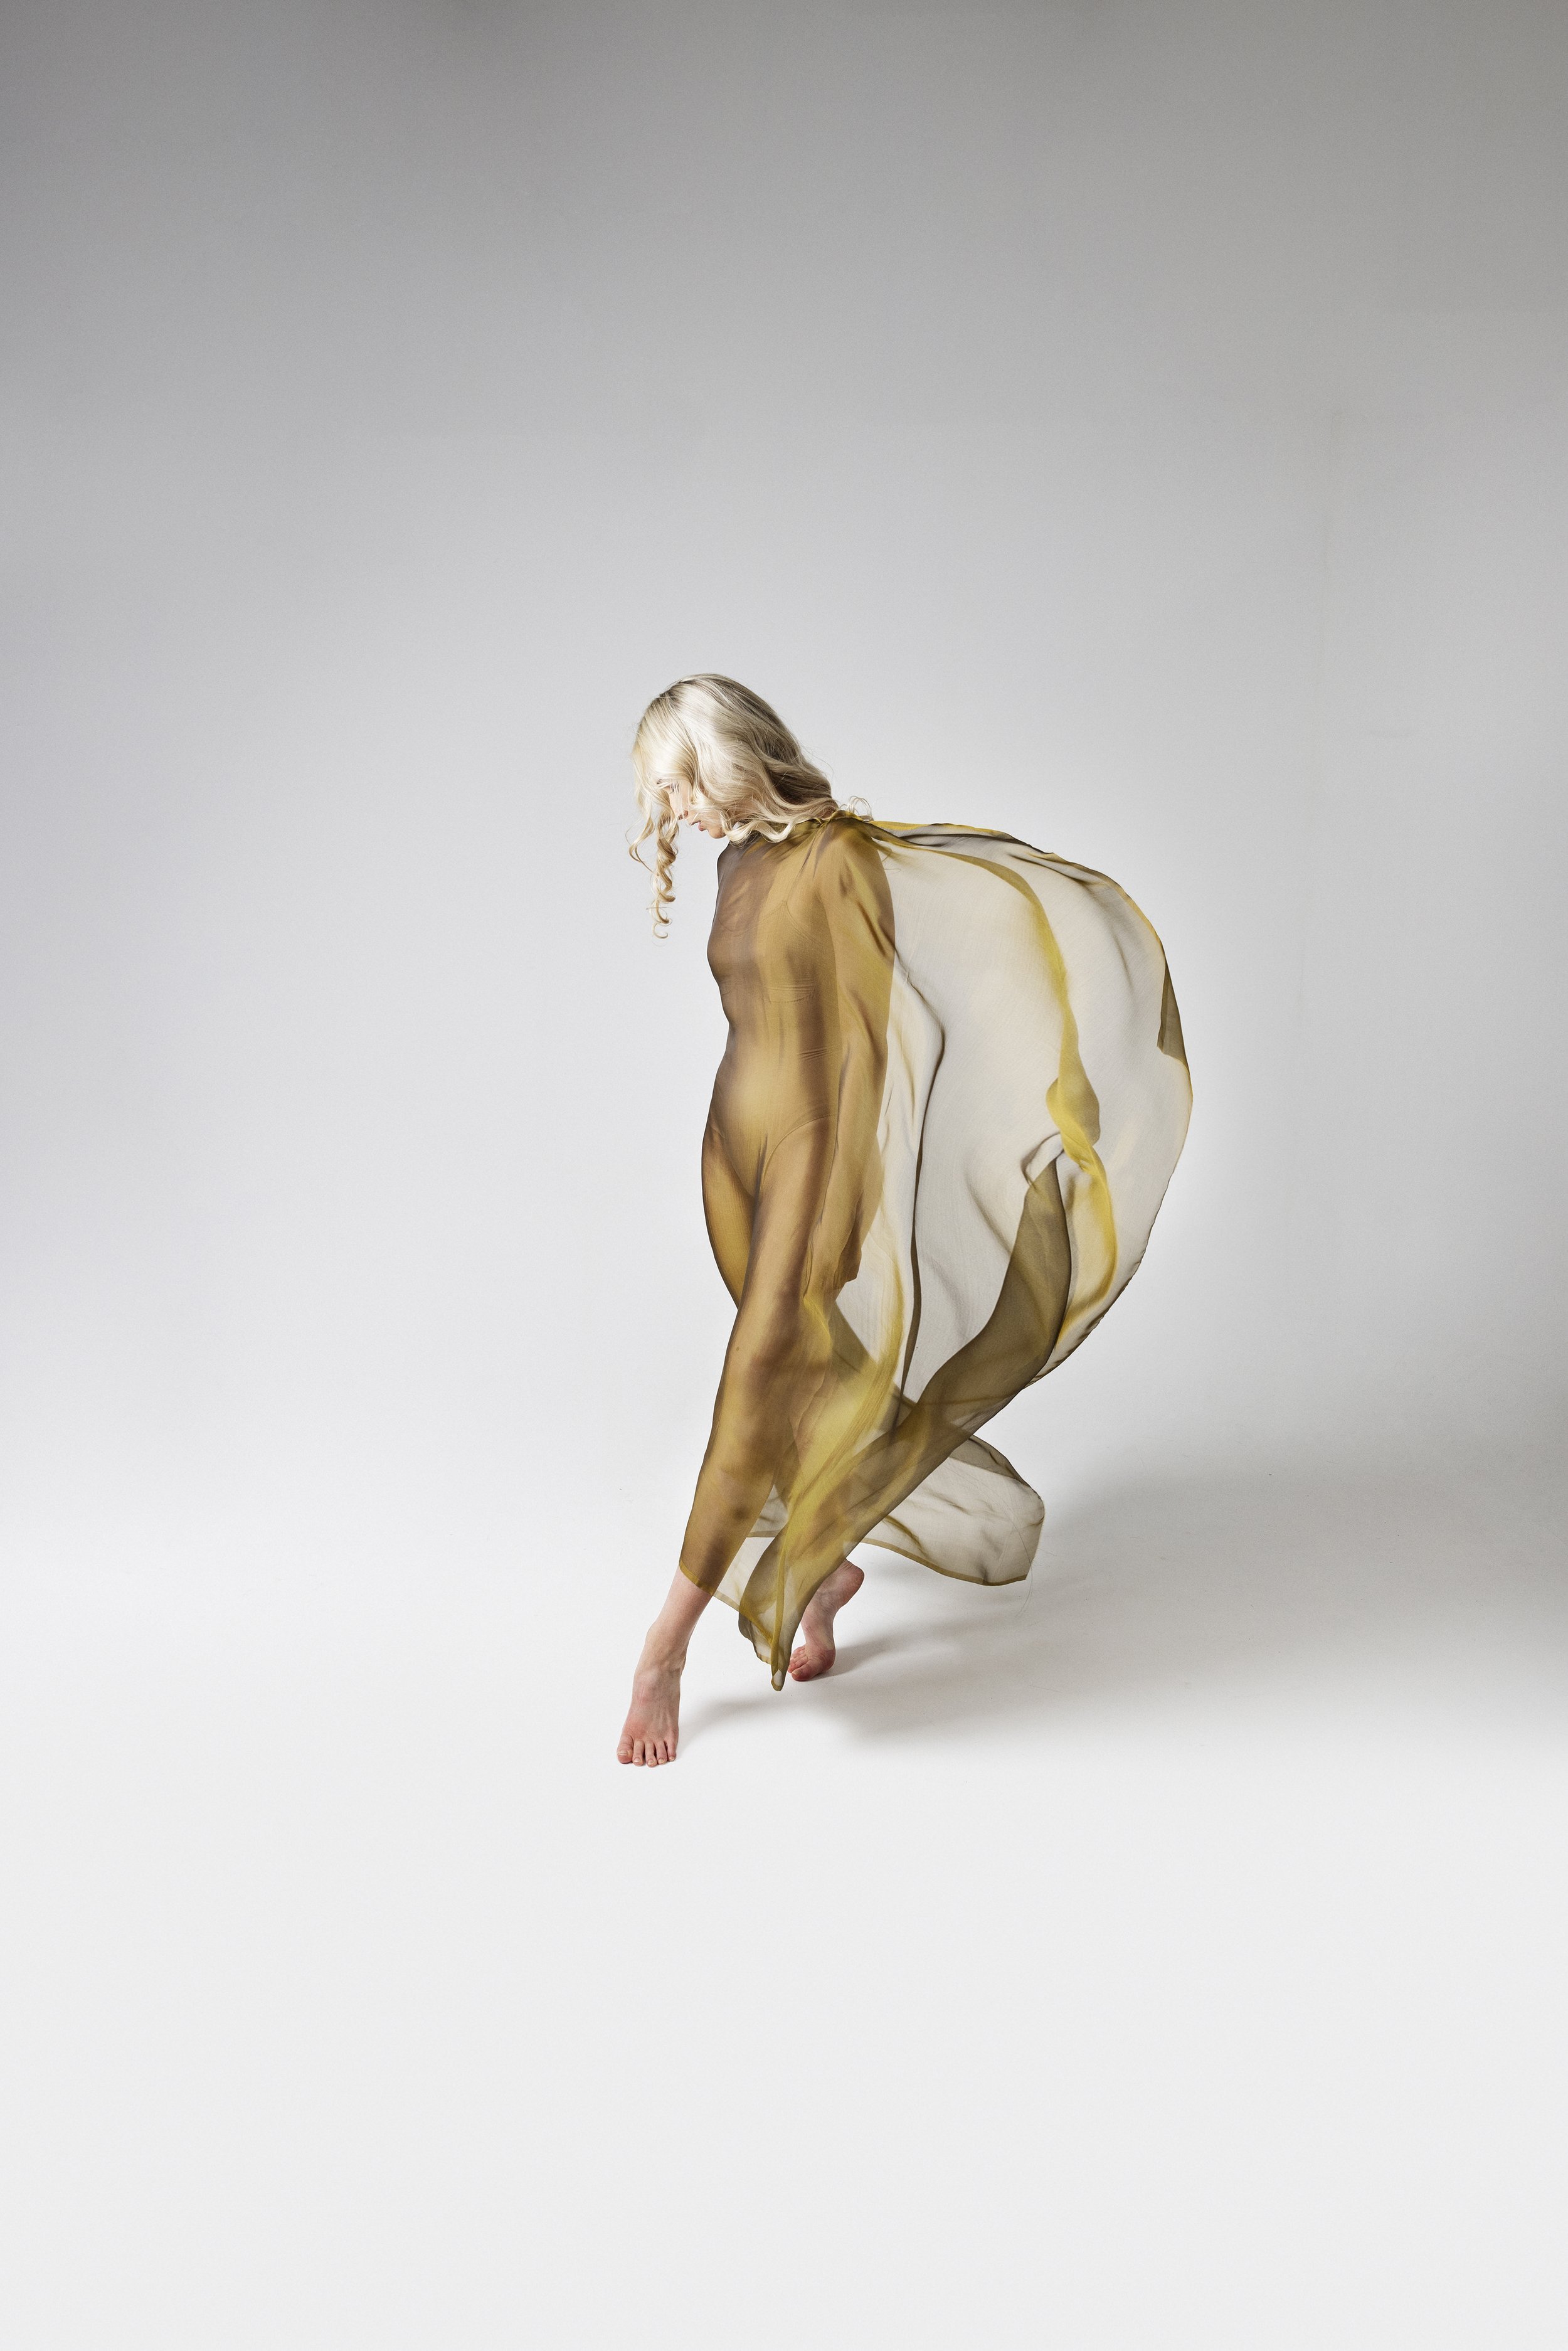 Woman with fabric flowing behind her during Motion Dance Portrait Session with Beauclair Photography